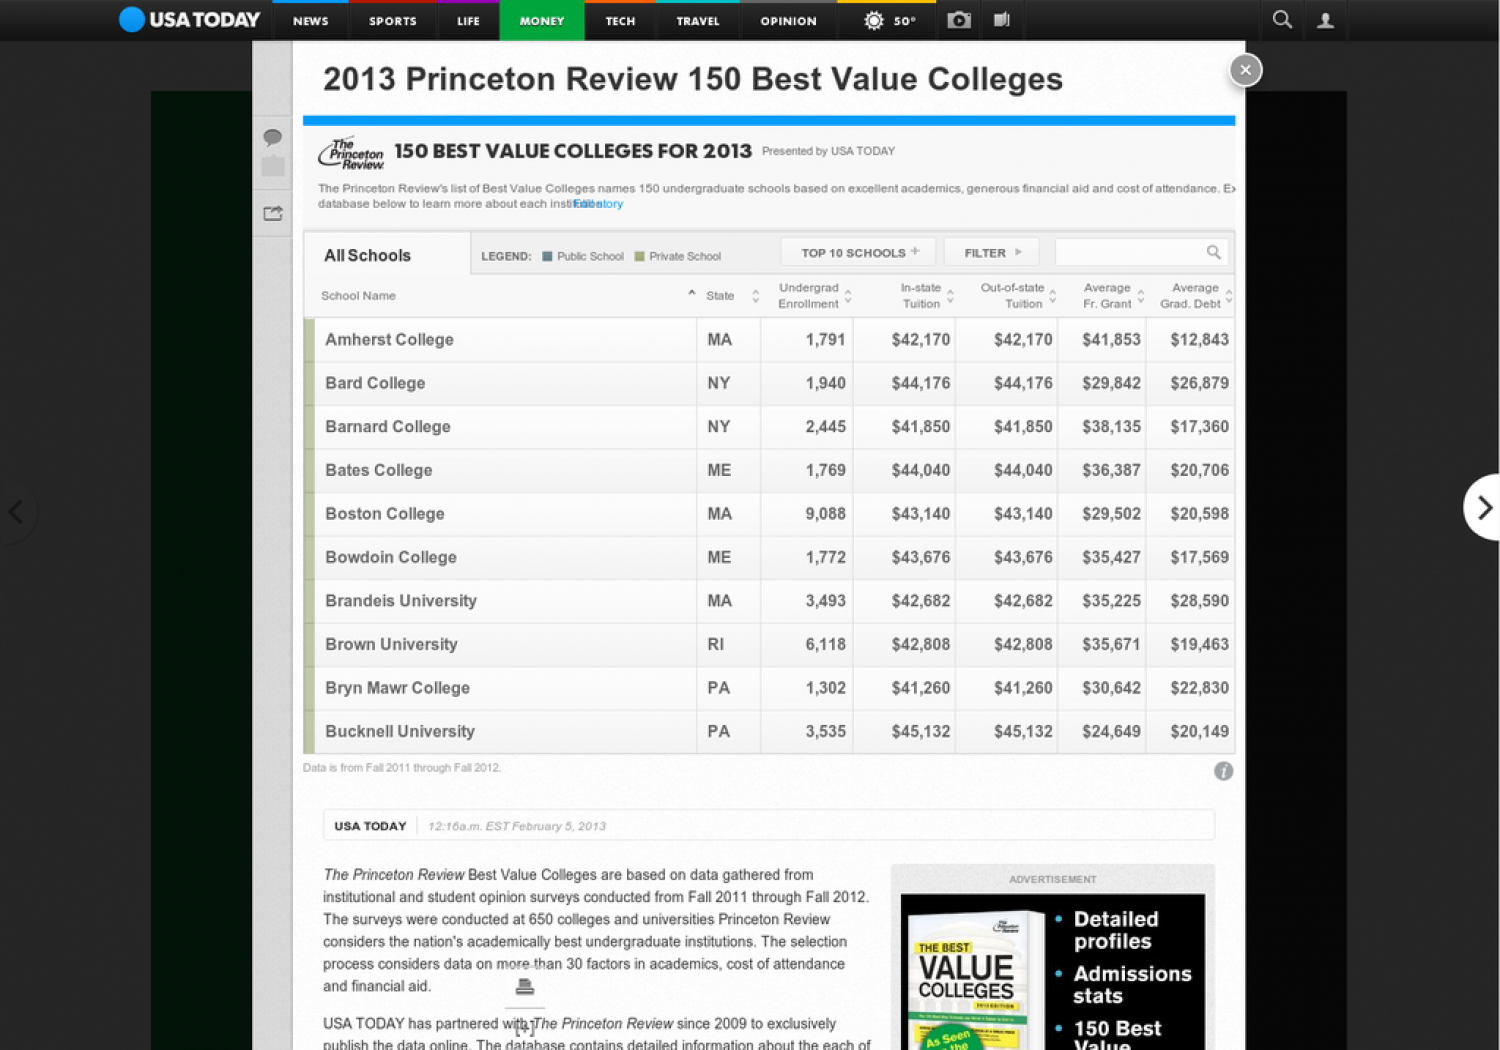 Princeton Review/USA TODAY 150 Best Value Colleges for 2013 Infographic